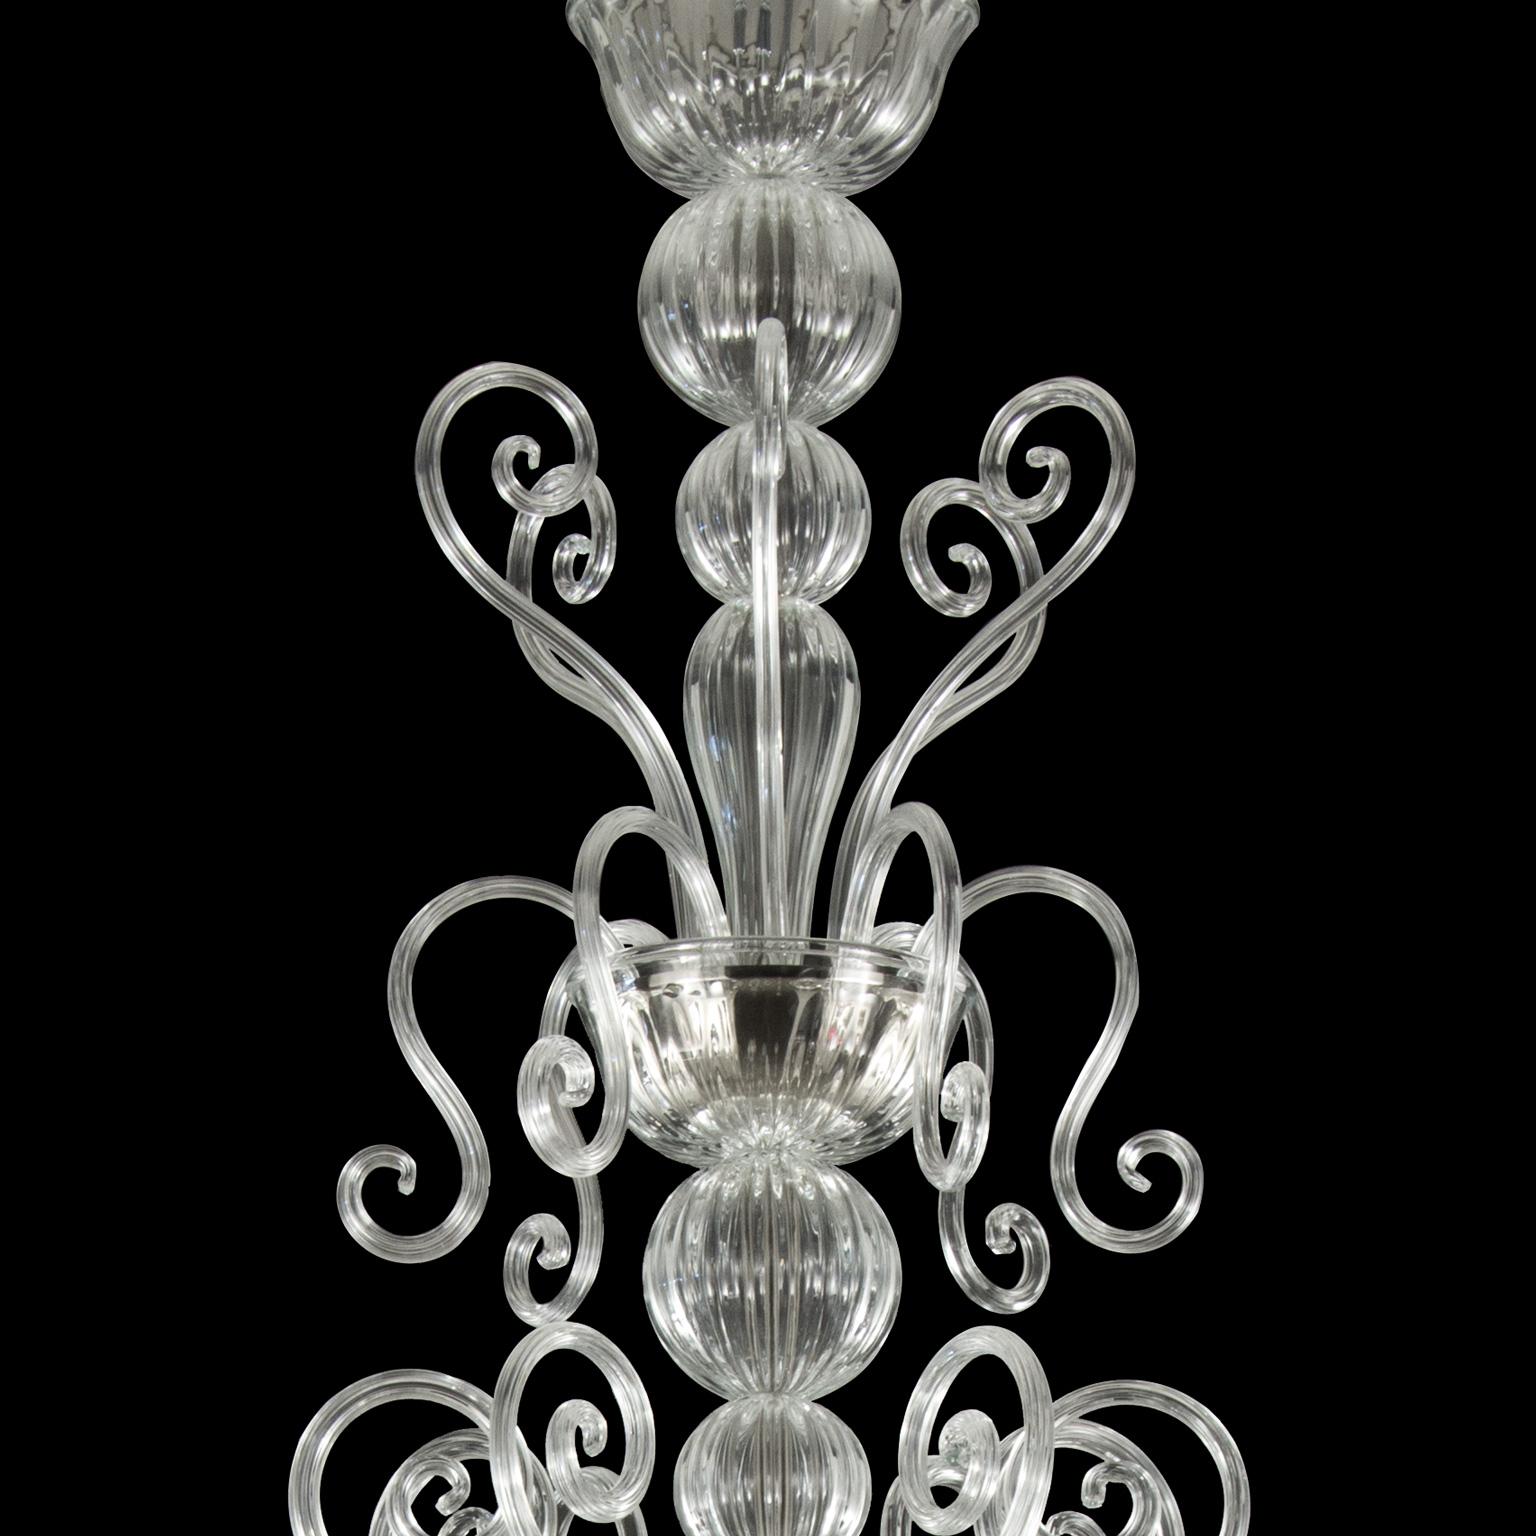 Italian Artistic Chandelier 10+5 arms transparent Murano Glass Gatsby by Multiforme For Sale